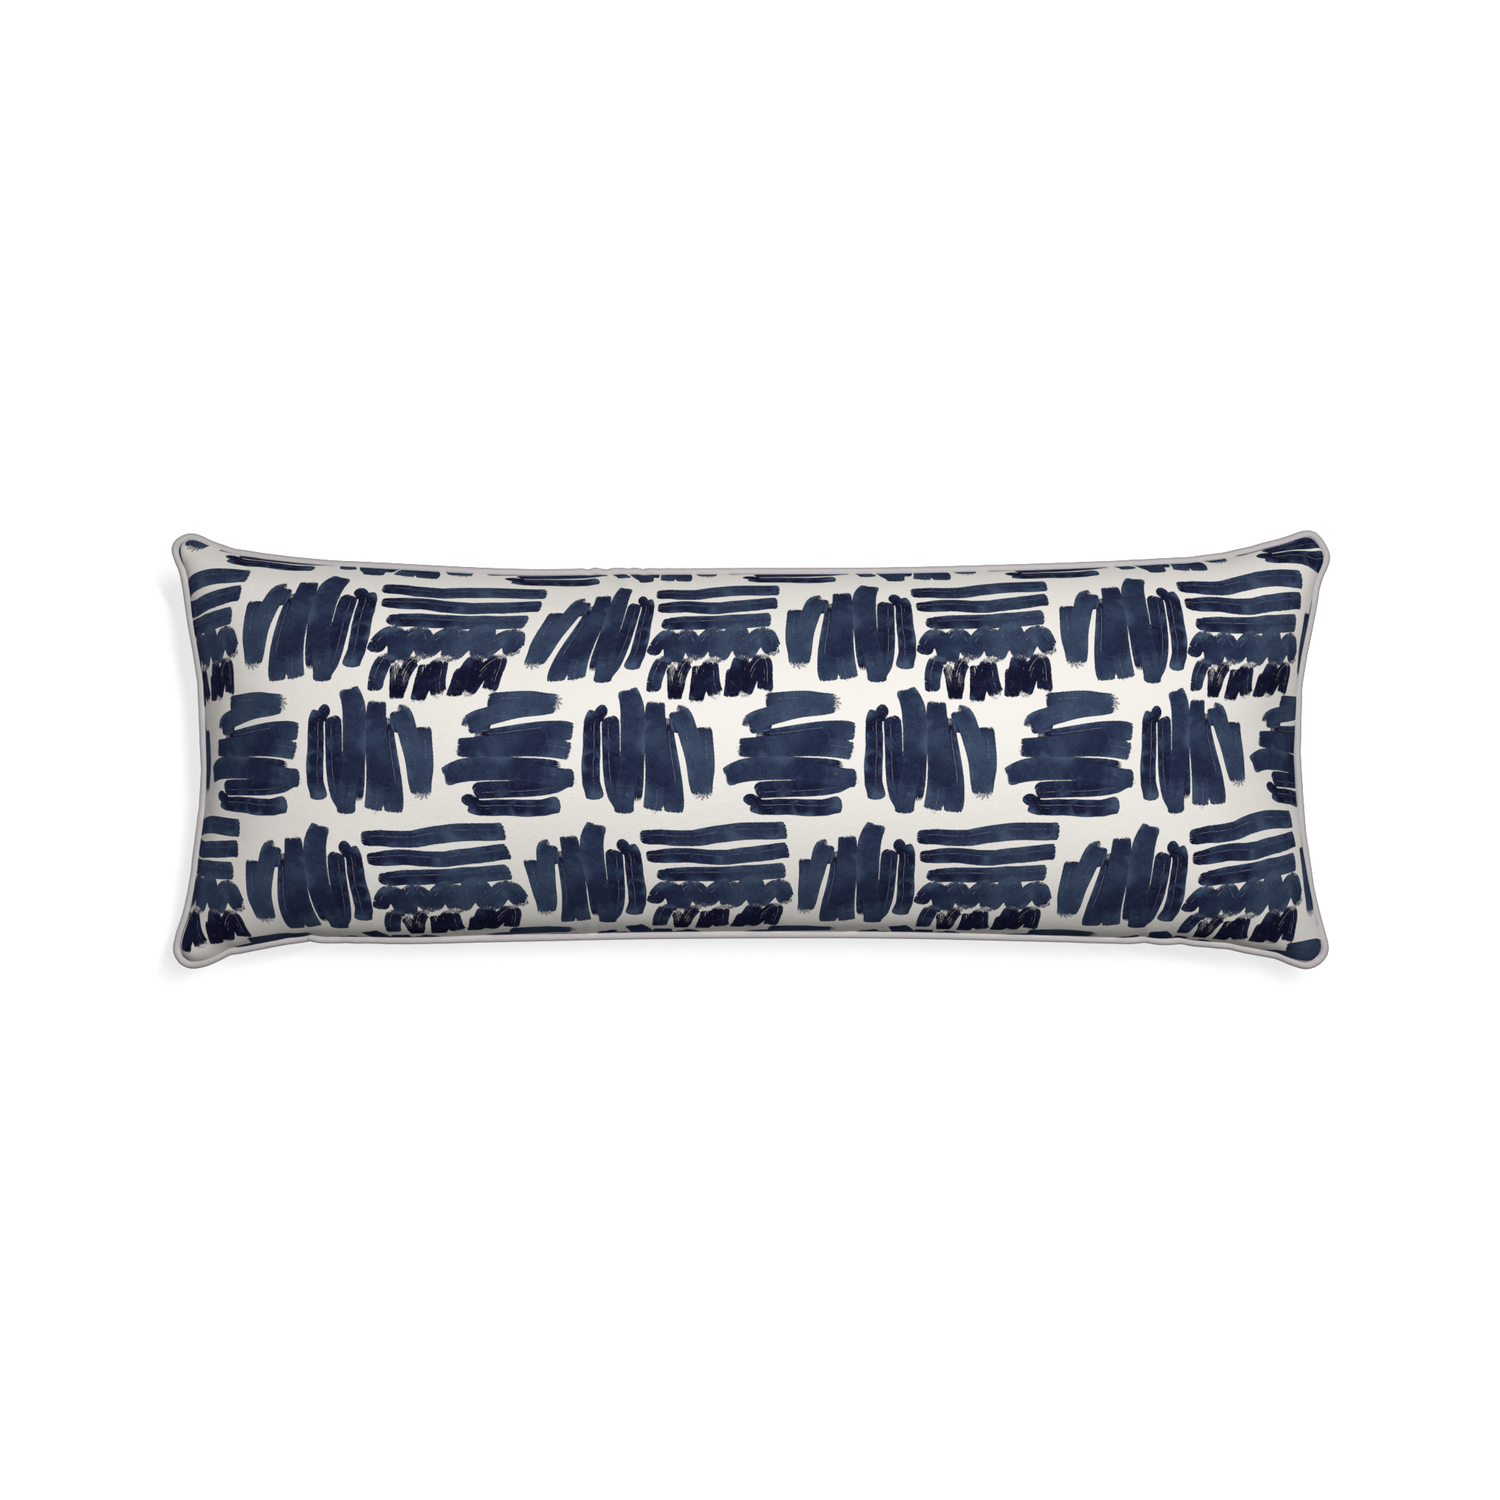 Xl-lumbar warby custom pillow with pebble piping on white background